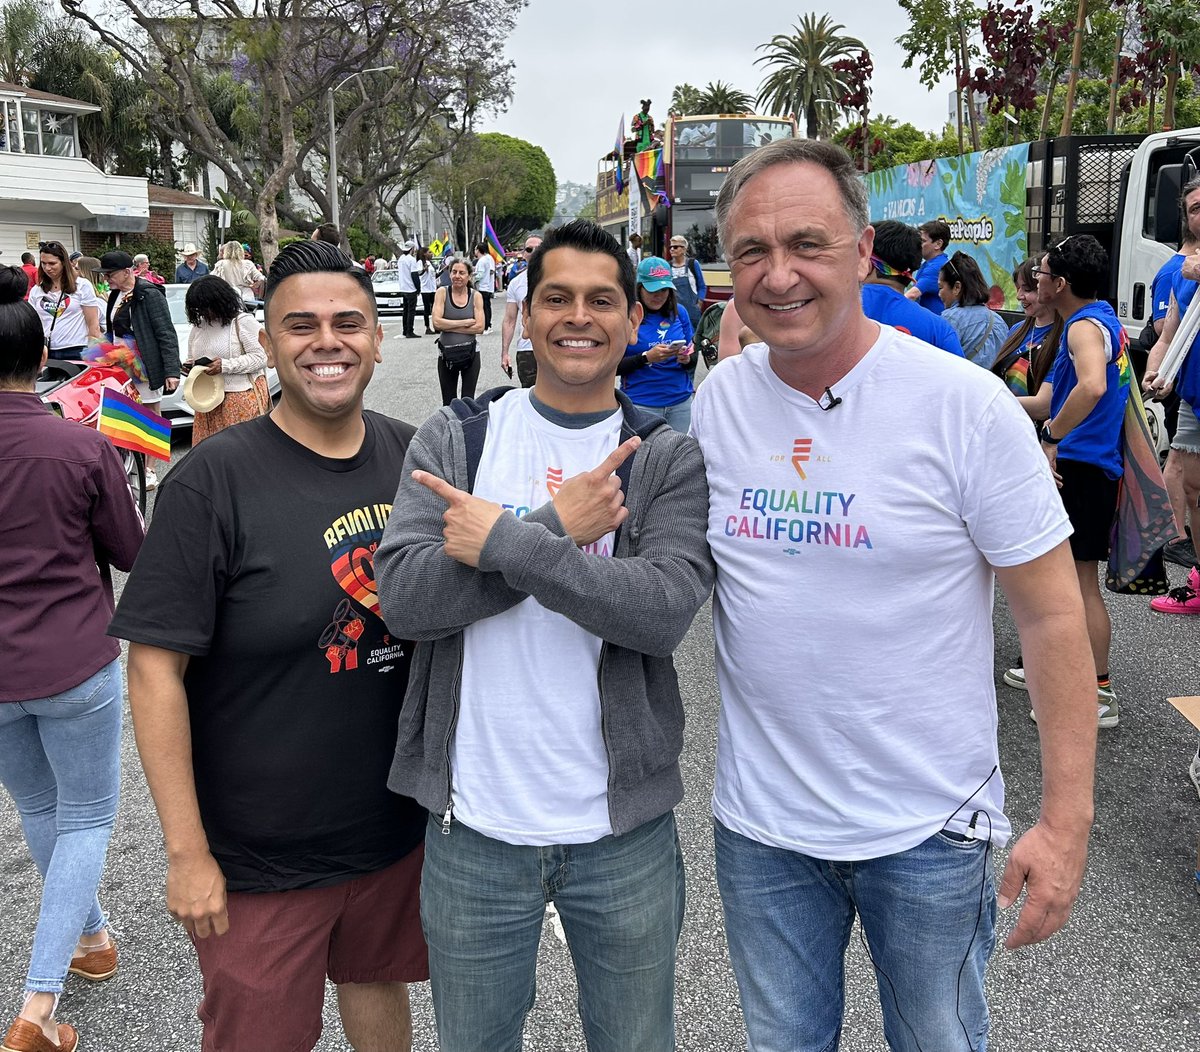 We are celebrating ALL members of the LGBTQI+ community and standing up against hate and attacks across the country. 

Happy Weho pride 🏳️‍🌈🏳️‍⚧️
#WestHollywood #Weho #WeHoPride